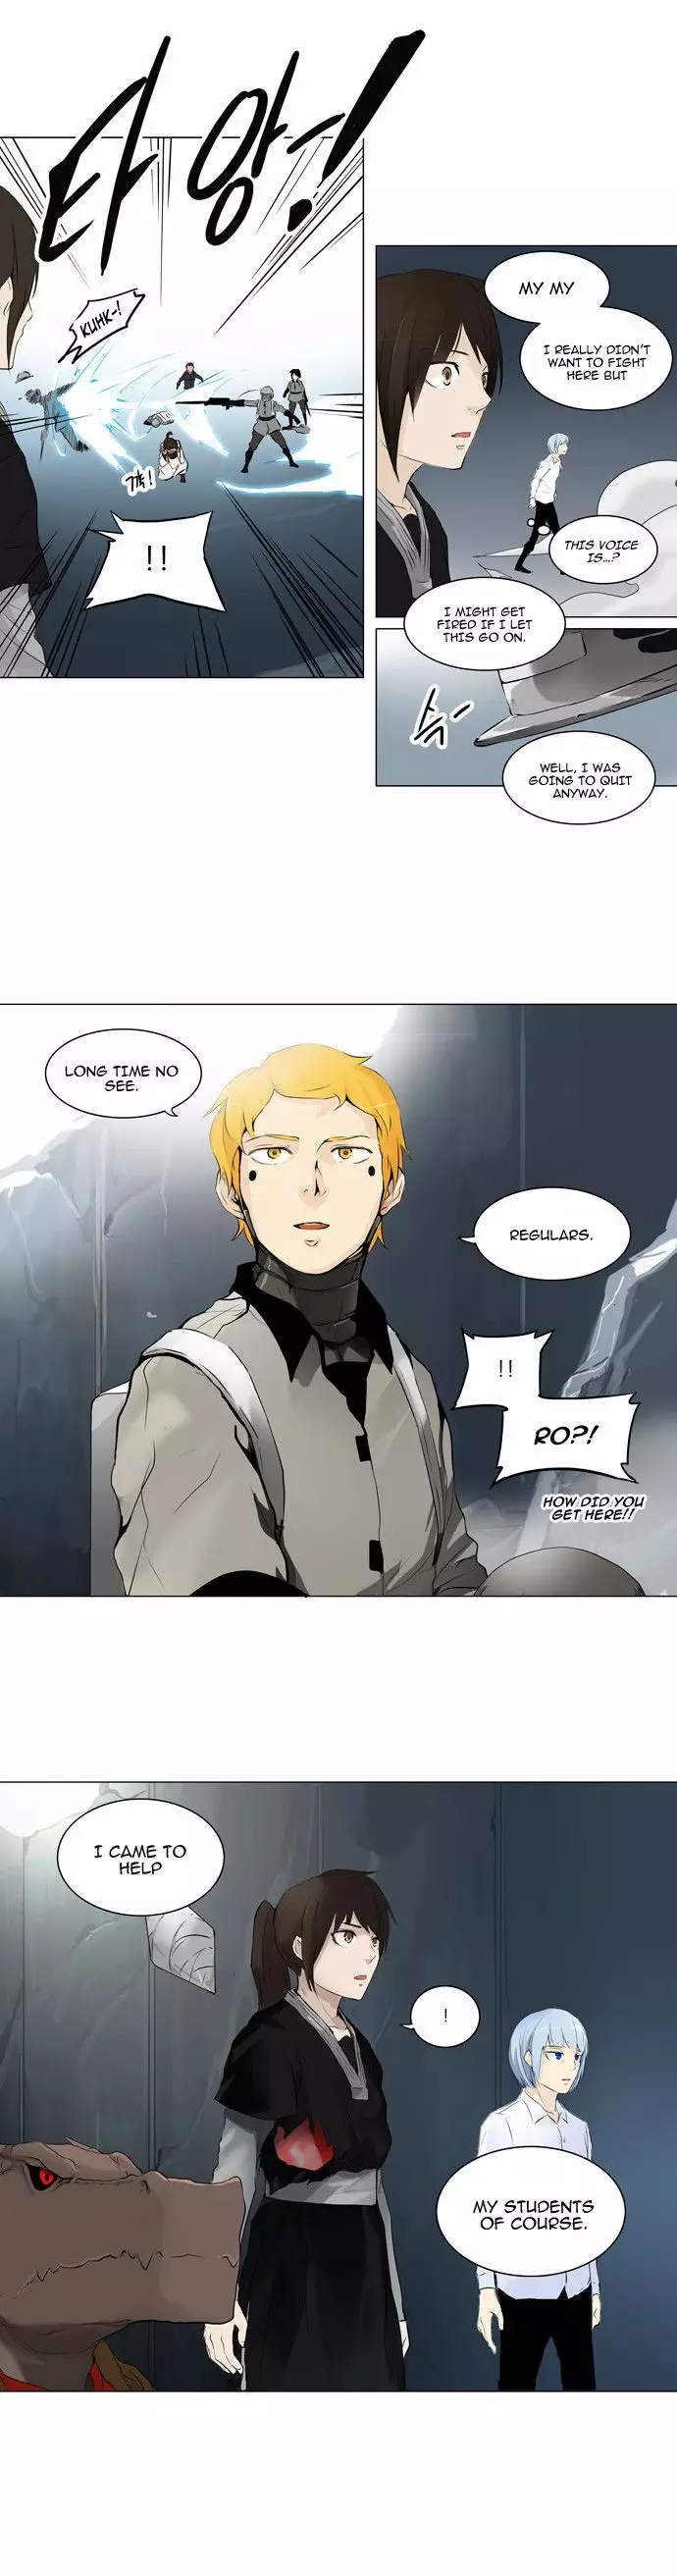 Tower of God - 176 page p_00018